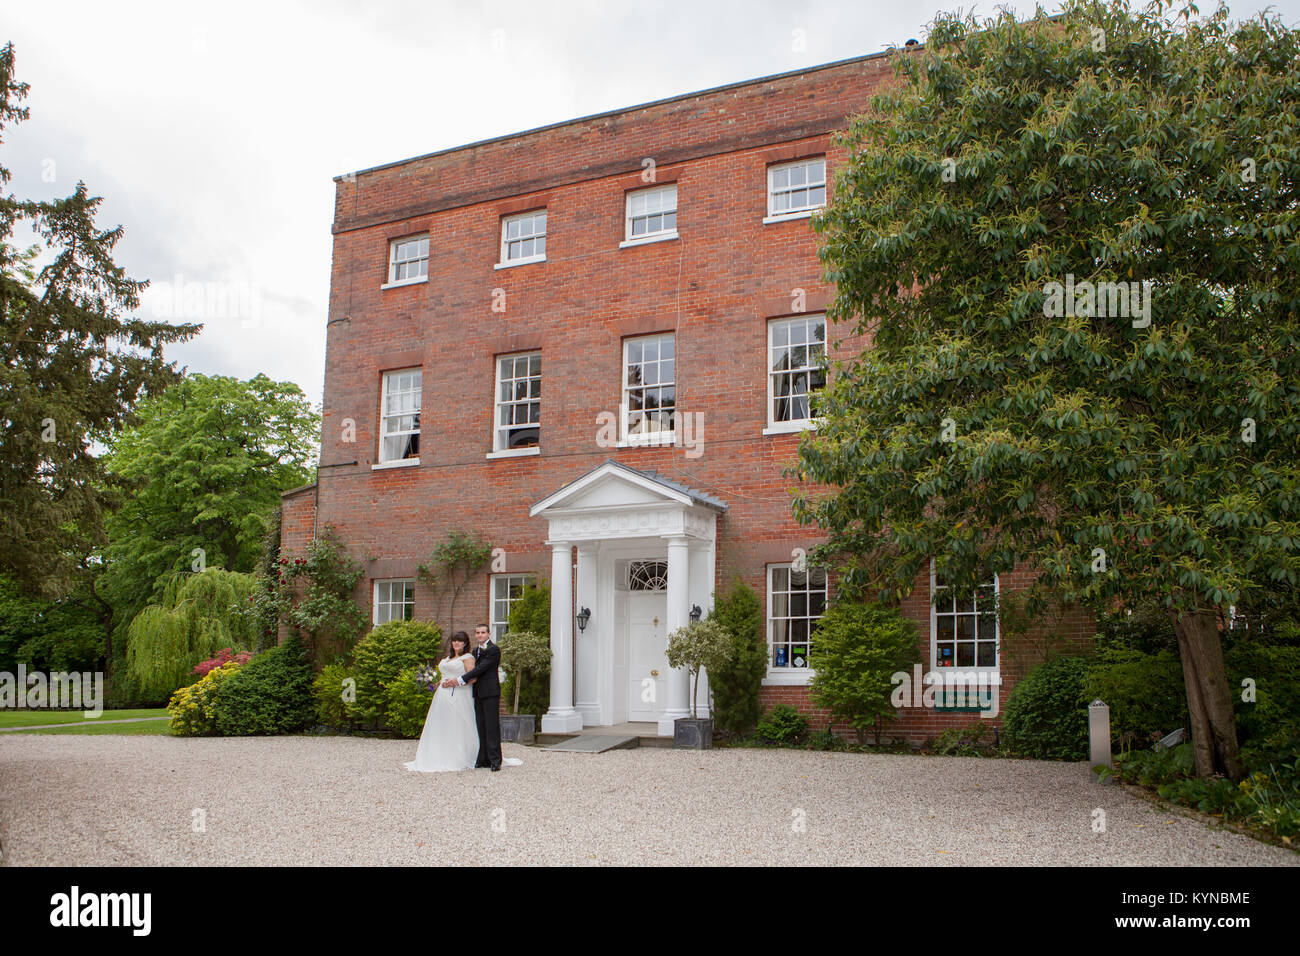 Mulberry House Wedding Event Center, Chelmsford road, High Ongar, Ongar CM5 9NL Banque D'Images